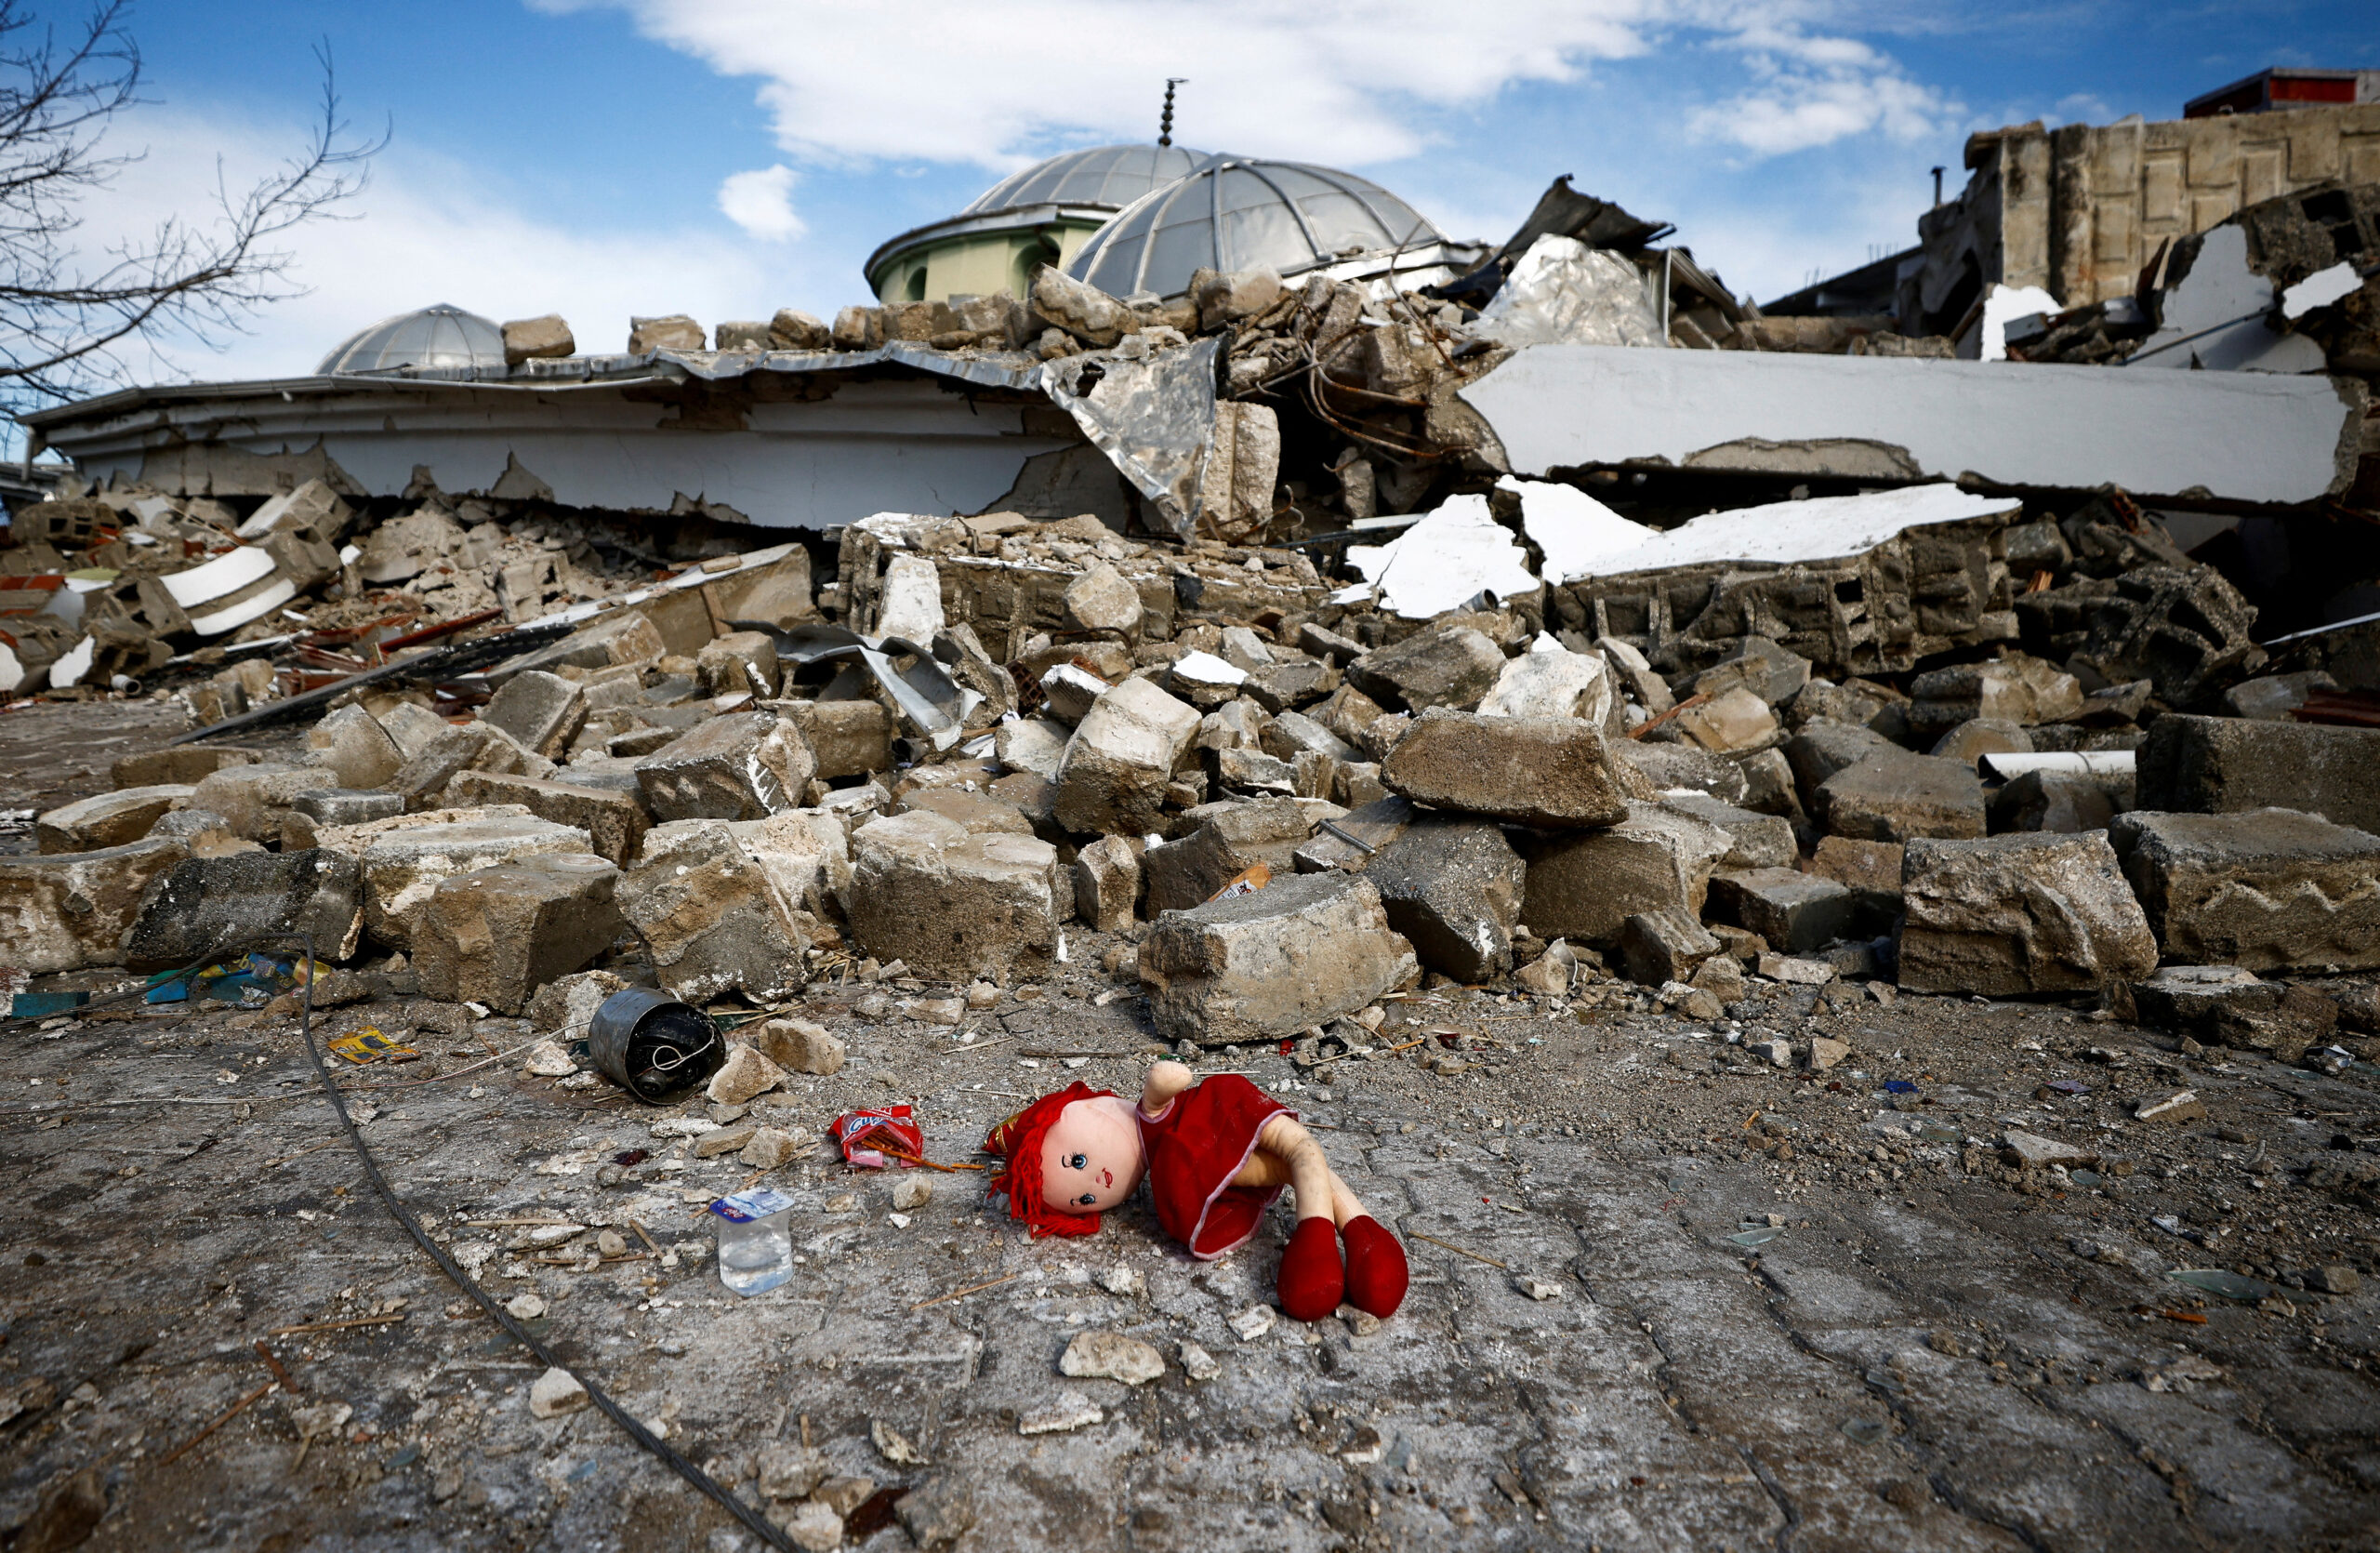 A doll lies on the ground near the site of a collapsed mosque, following an earthquake in Hatay, Turkey February 7, 2023. REUTERS/Guglielmo Mangiapane